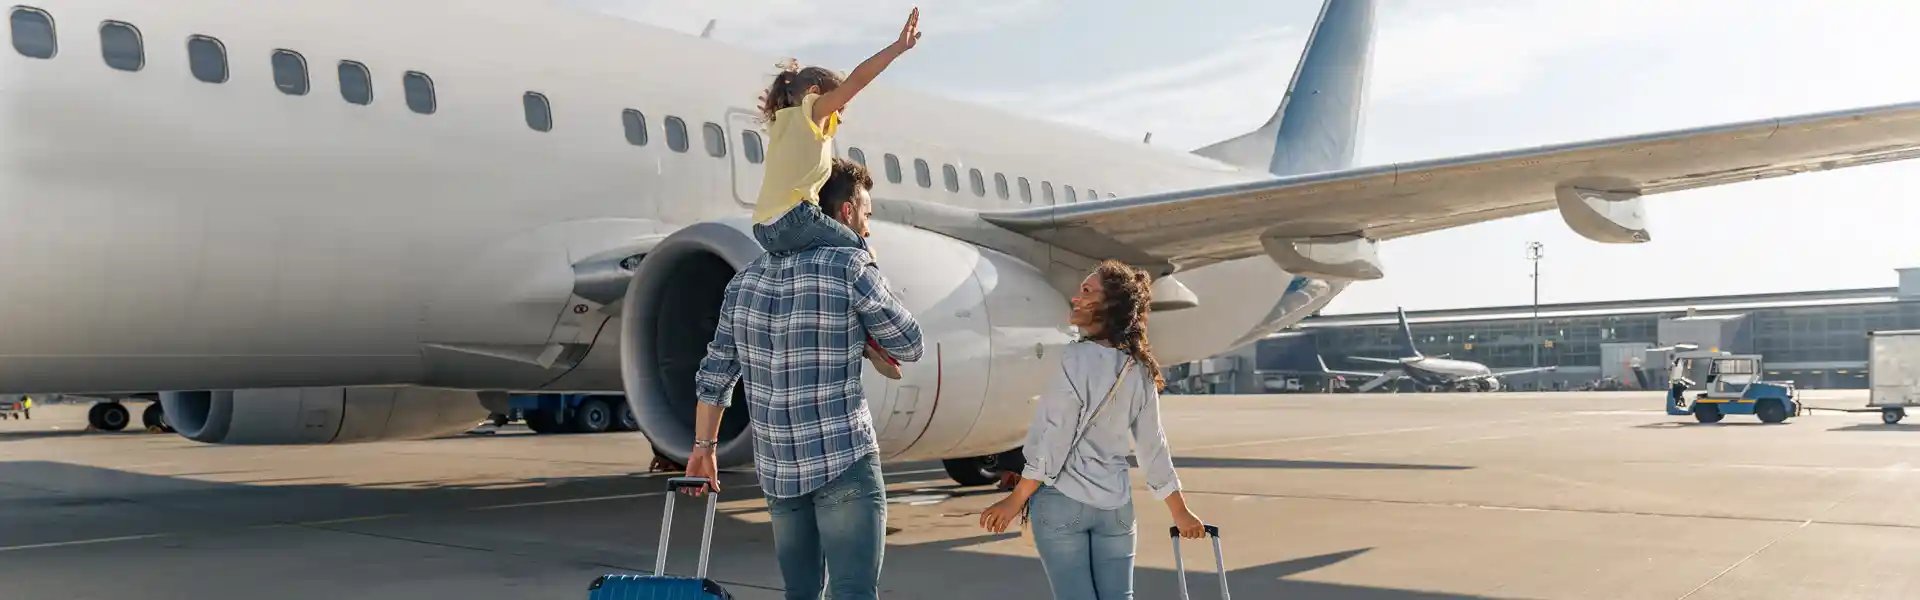 back-view-of-happy-family-standing-near-a-large-plane